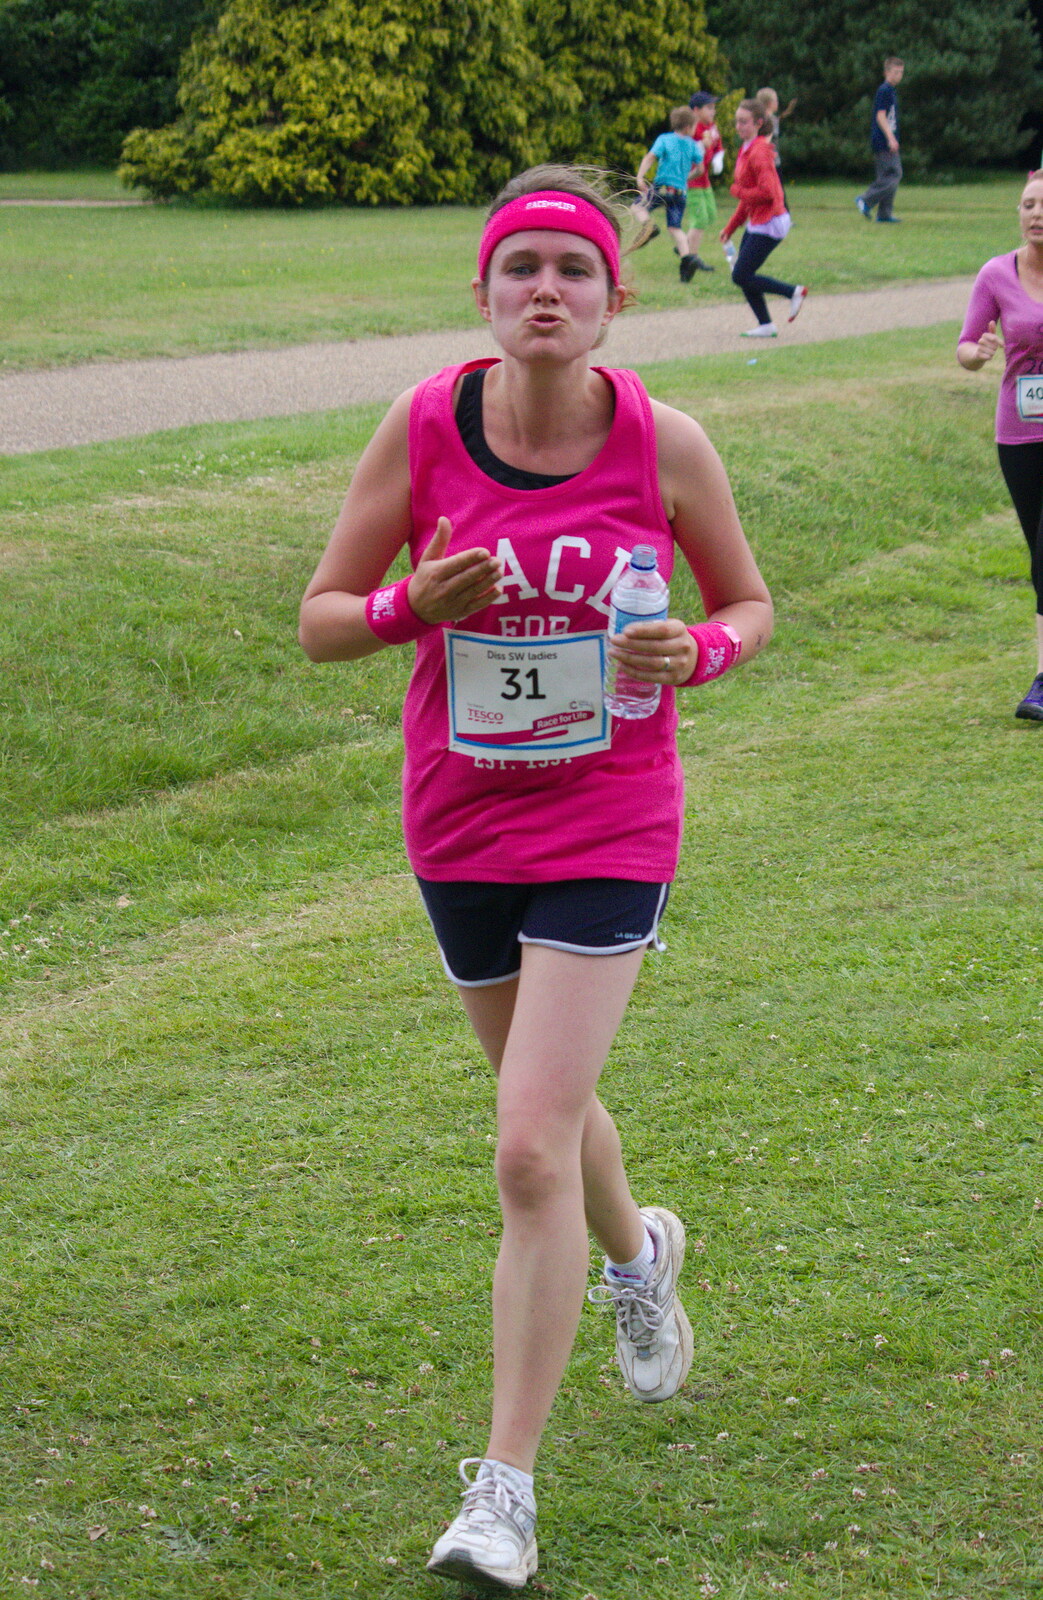 Isobel runs up for a kiss from Isobel's Race For Life, Chantry Park, Ipswich - 11th June 2014